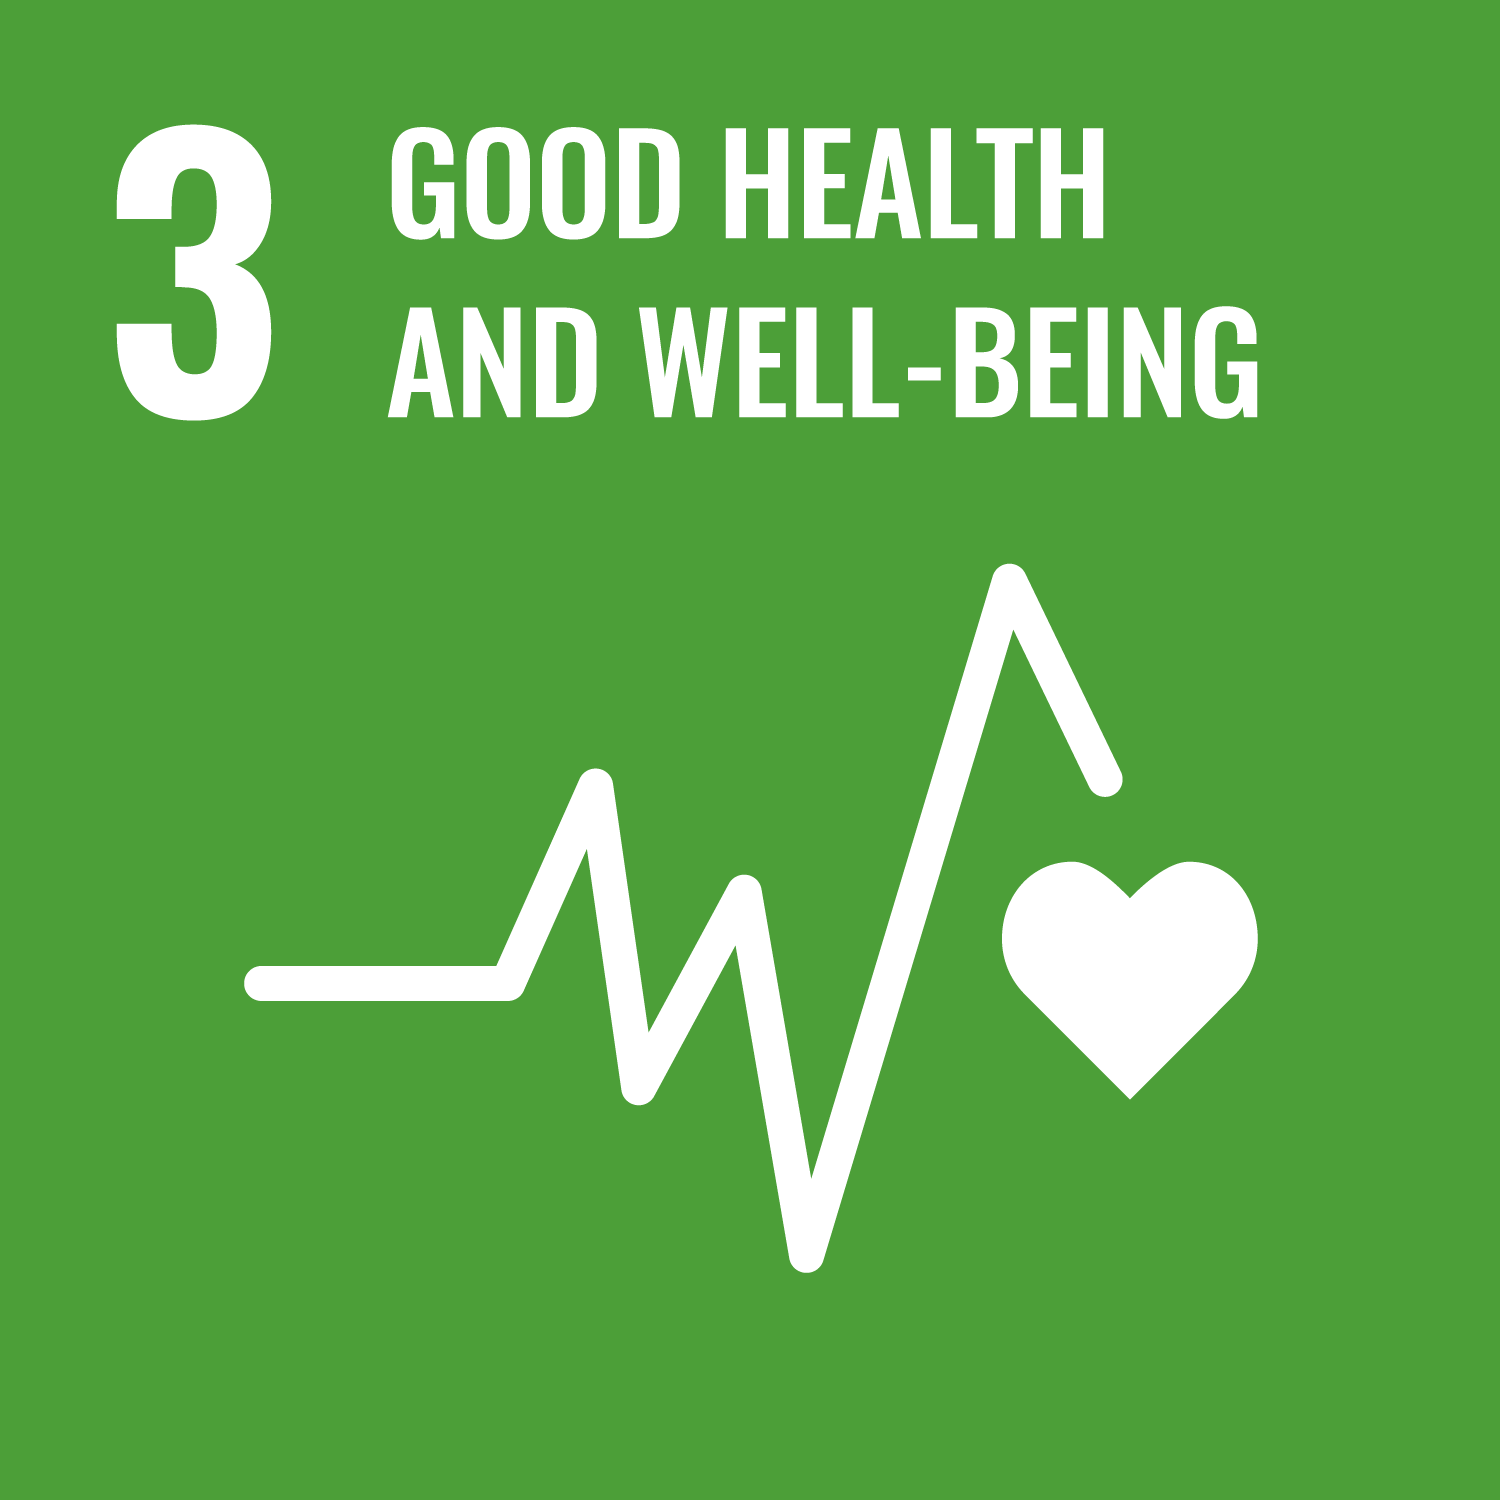 Goal Three: Ensure healthy lives and promote well-being for all at all age